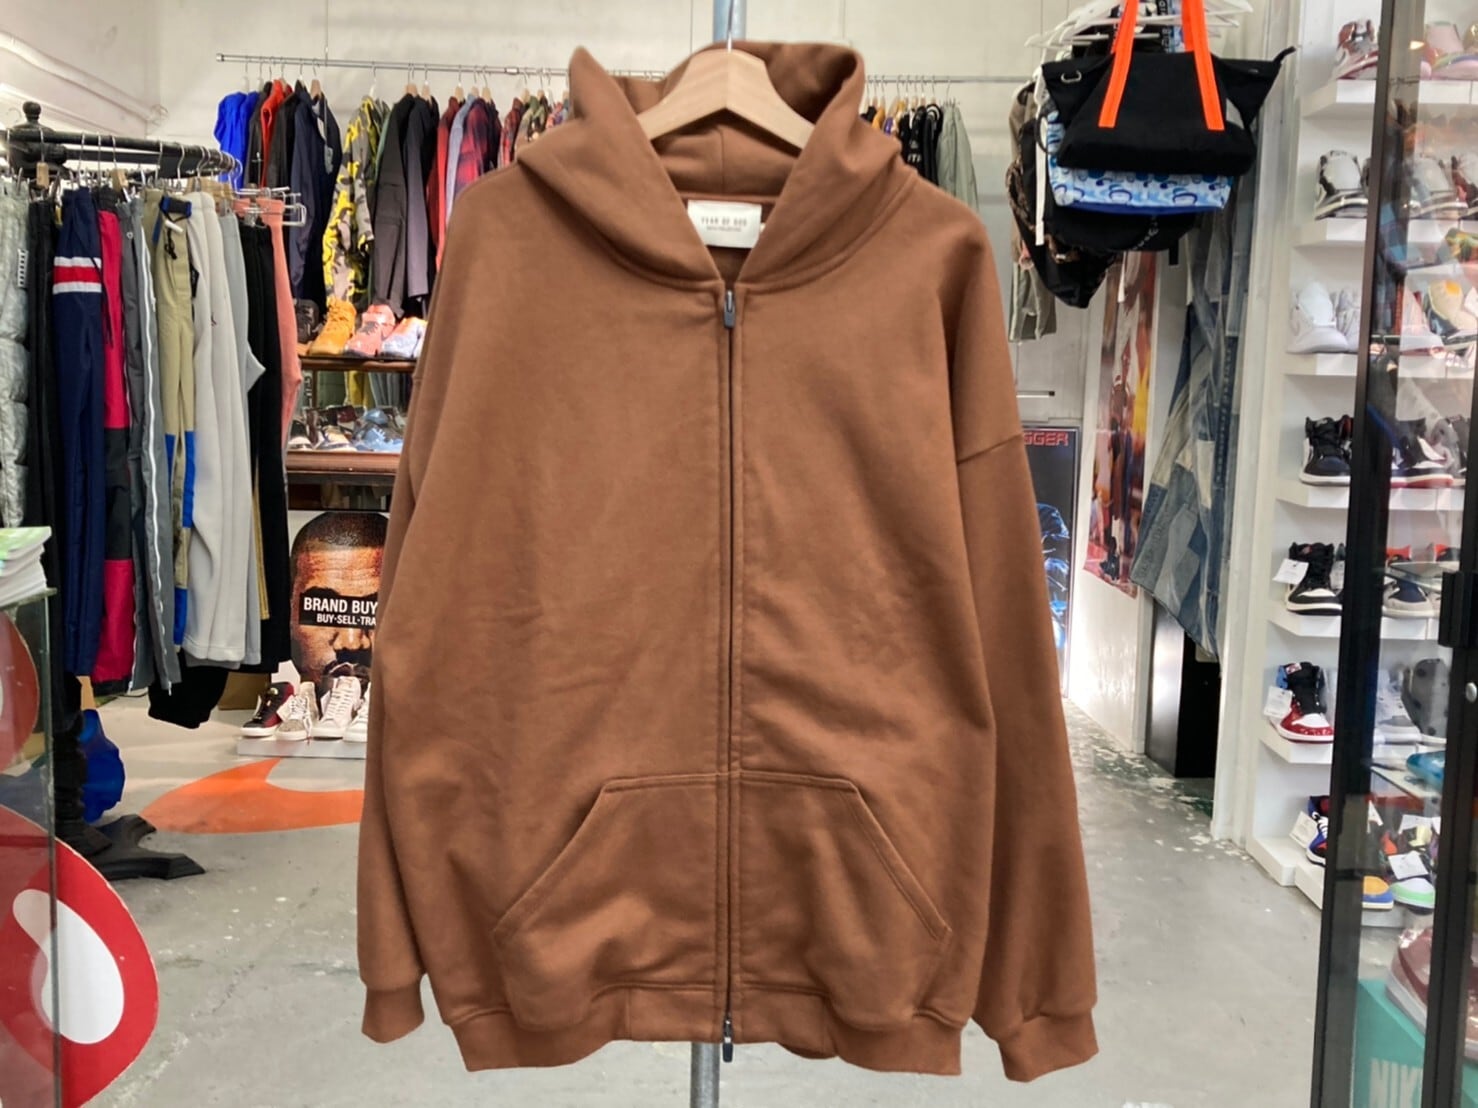 fear of god sixth  everyday hoodie S